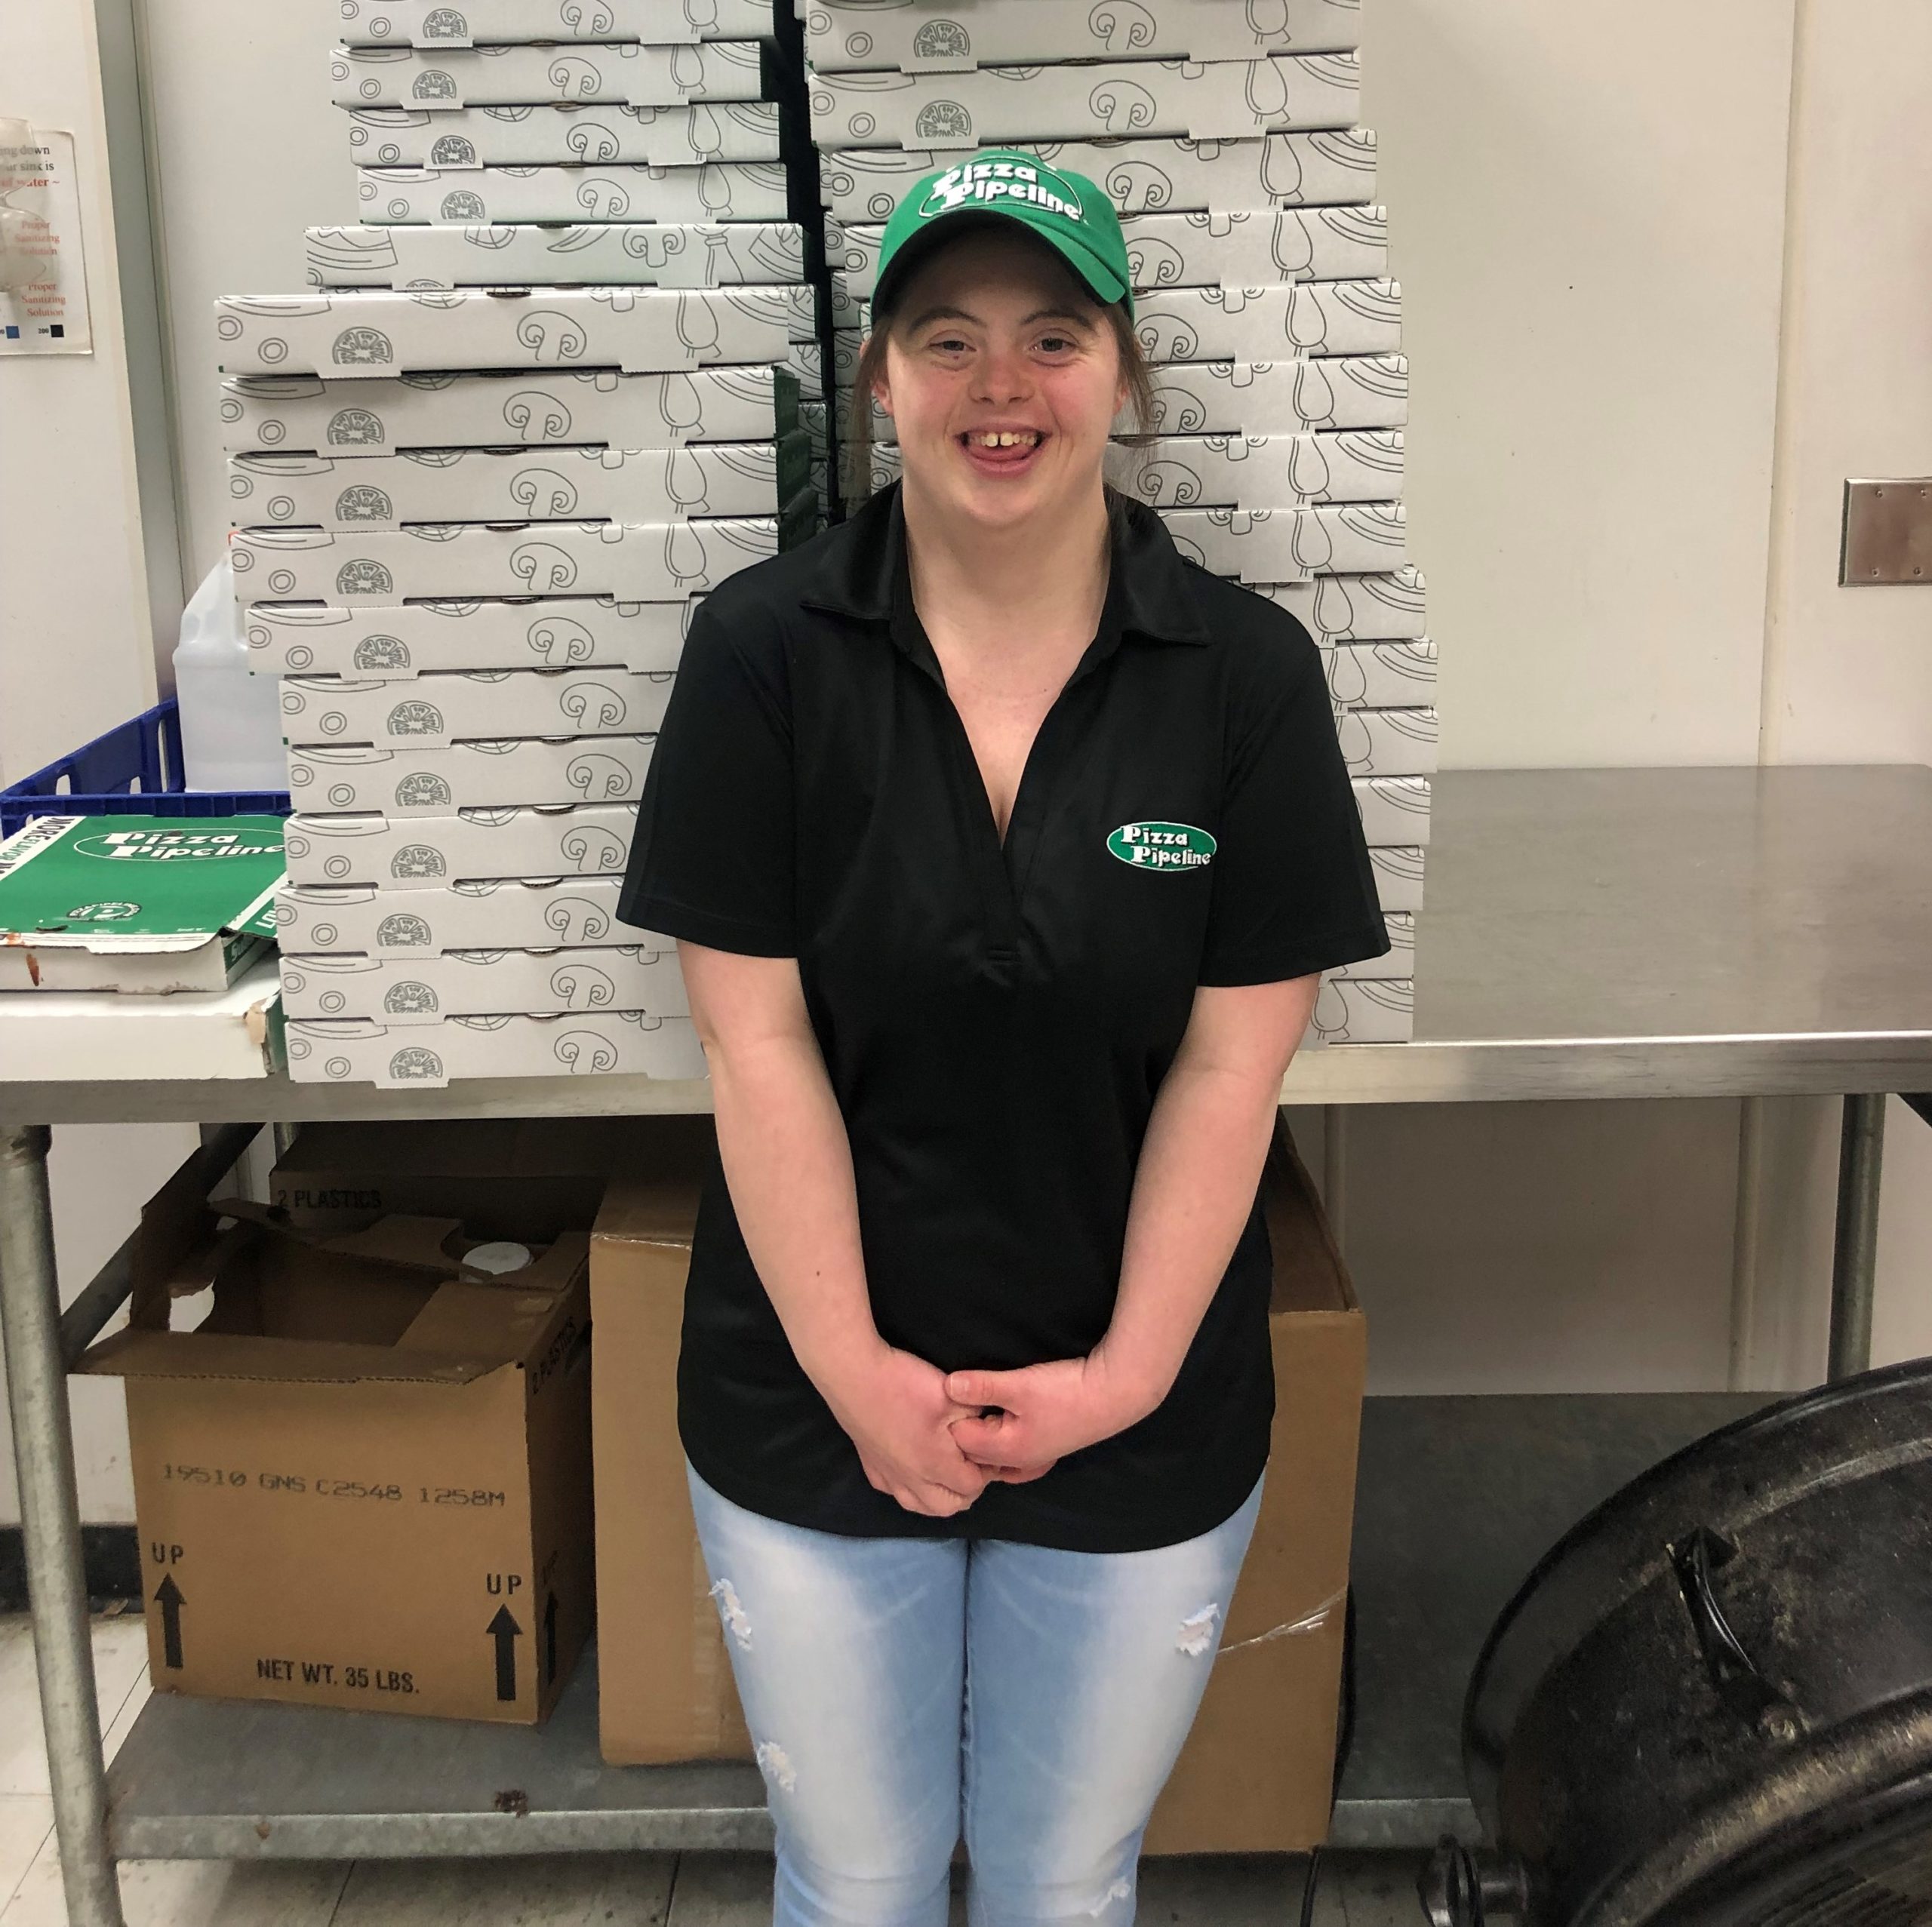 Laura, employed at Pizza Pipeline in Spokane